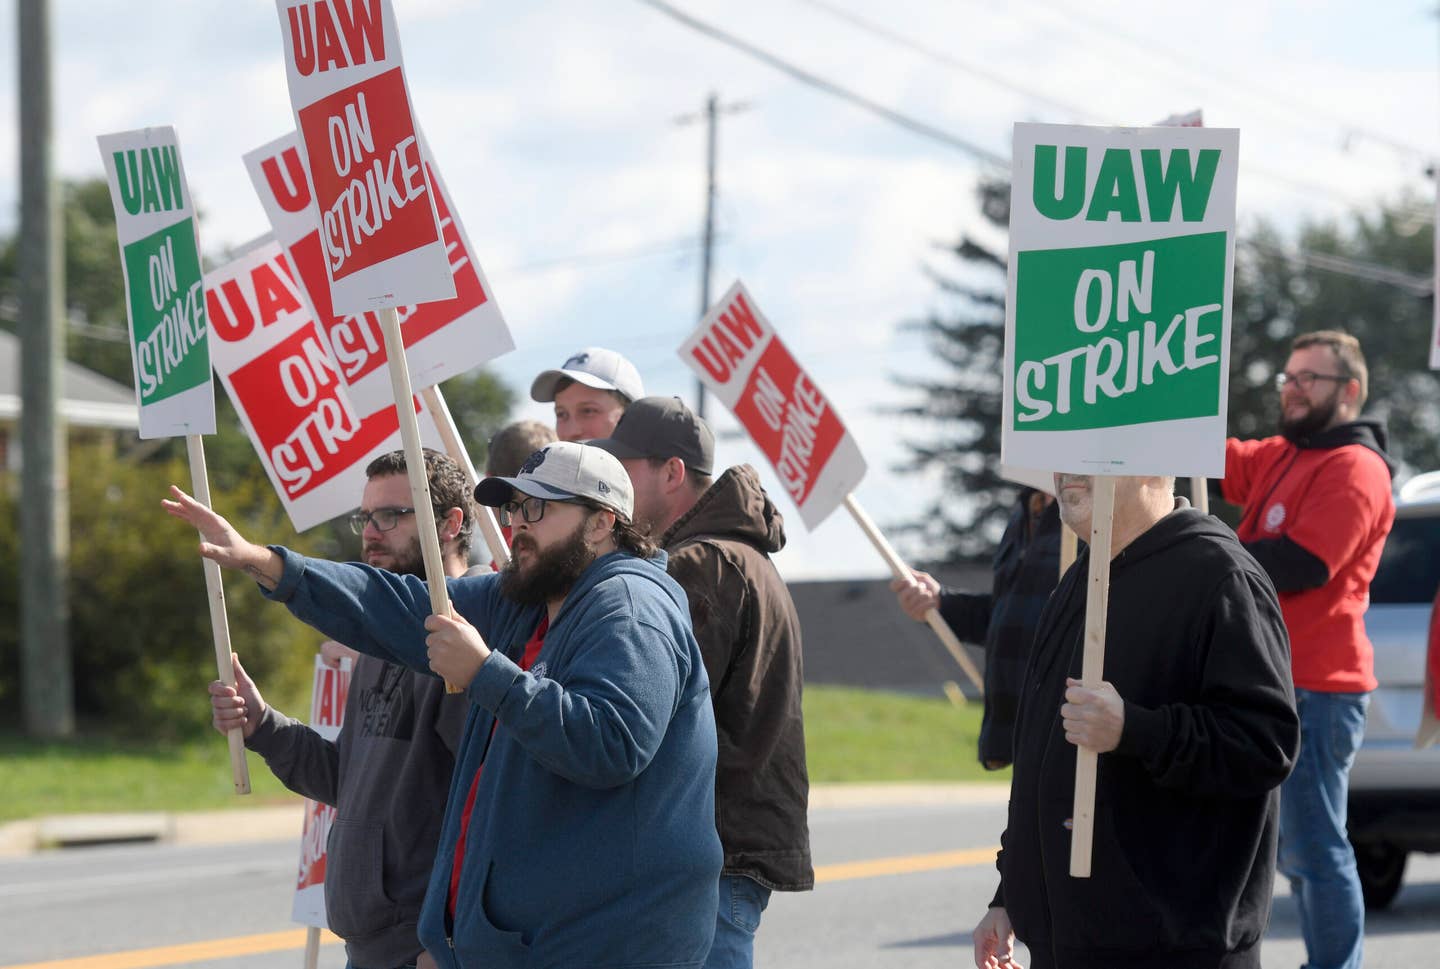 Members of UAW Local 171 picket outside a Mack Trucks facility in Hagerstown, Maryland after going on strike on Monday, Oct. 9.